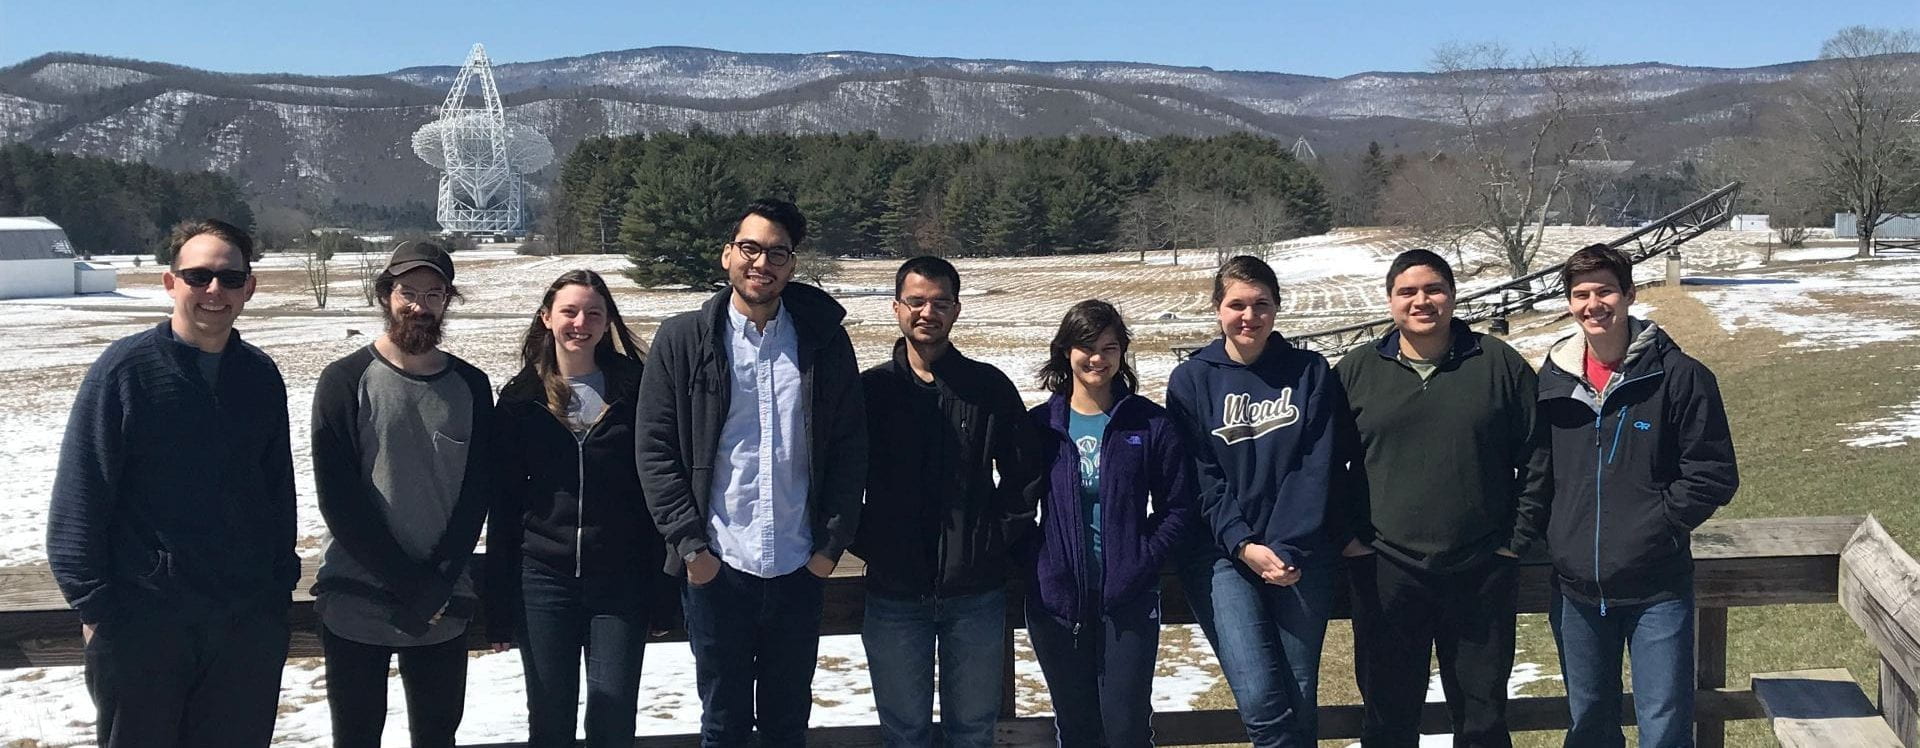 The 2018 graduate SETI course students stand in front of the Green Bank Telescope.